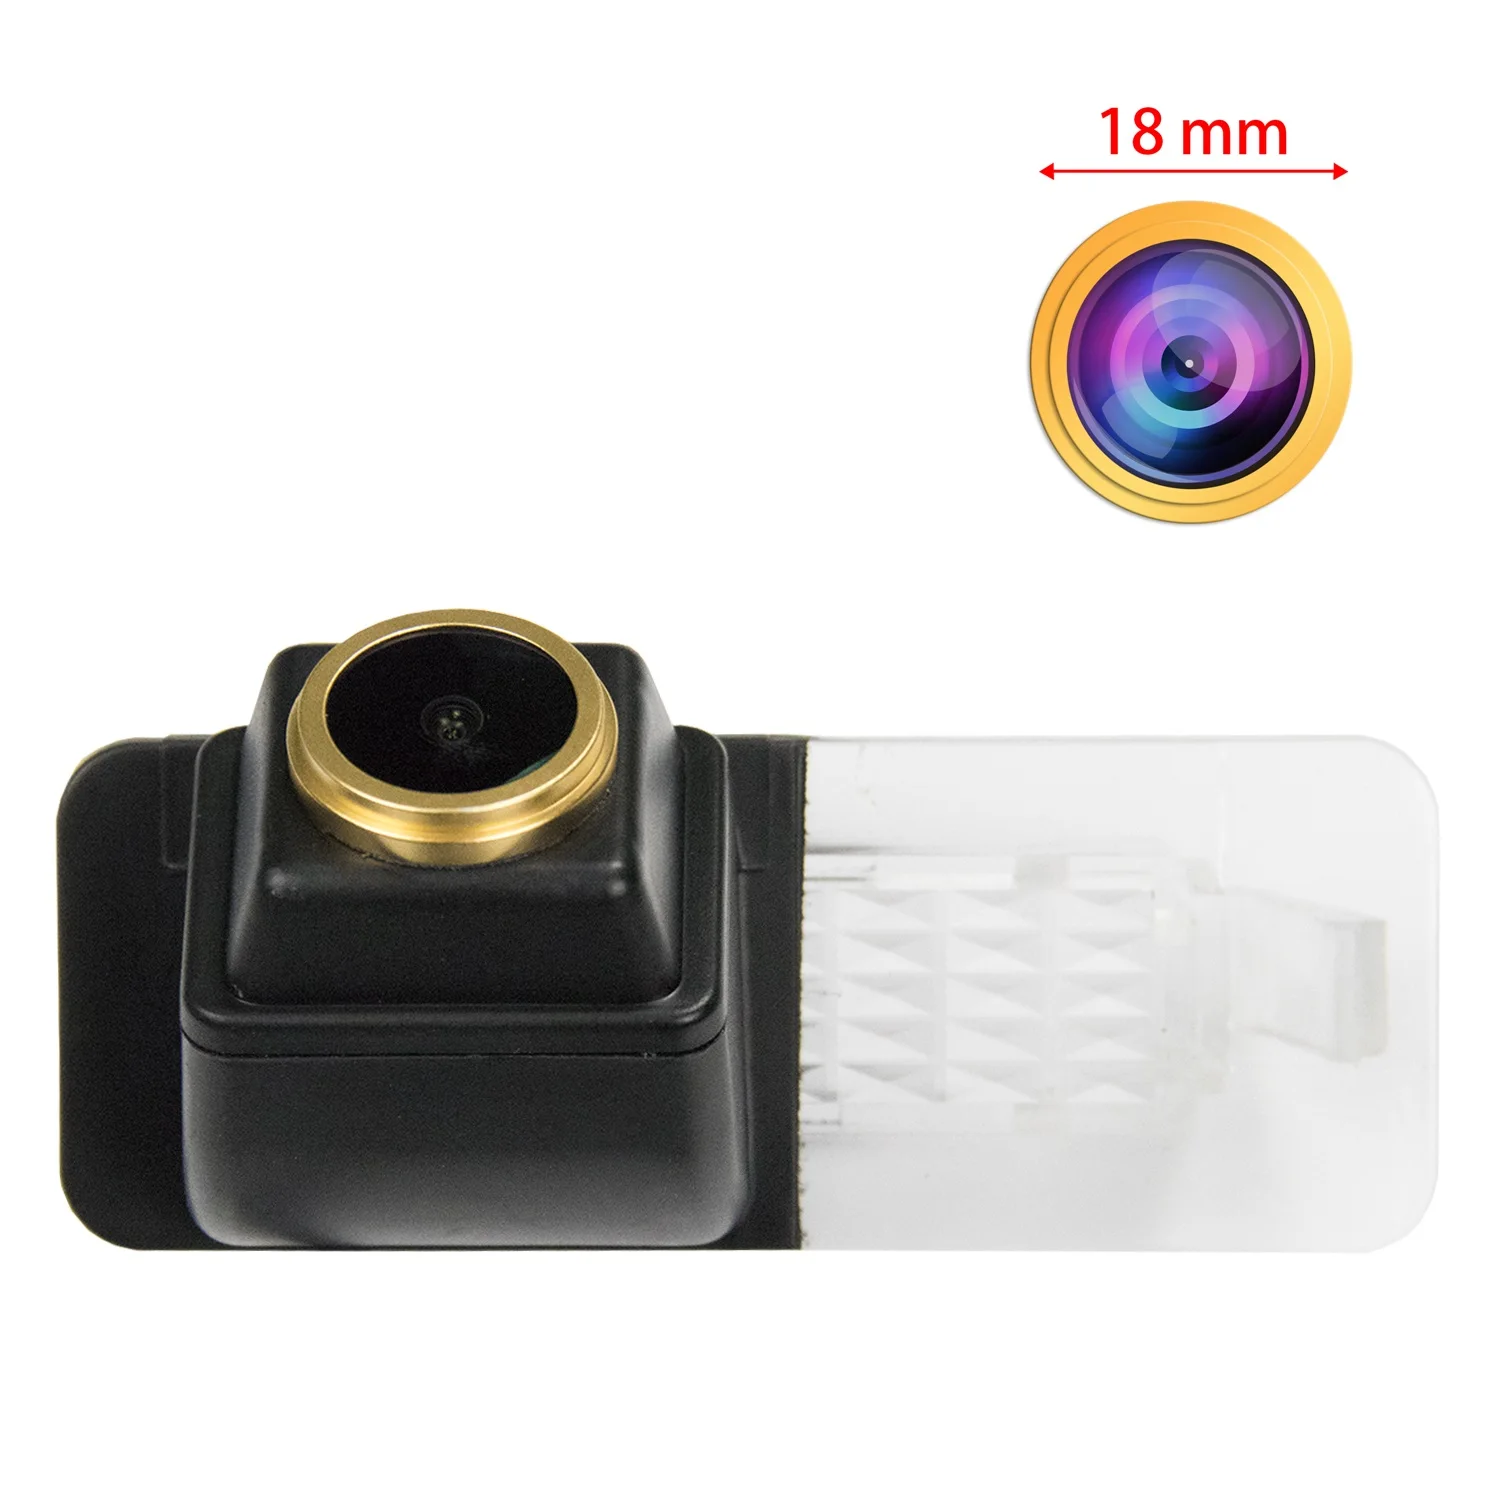 

Misayaee HD Car Rear View Parking Reverse Camera for MB Mercedes Smart R300 R350 Fortwo Smart ED Smart 451 2007-2014